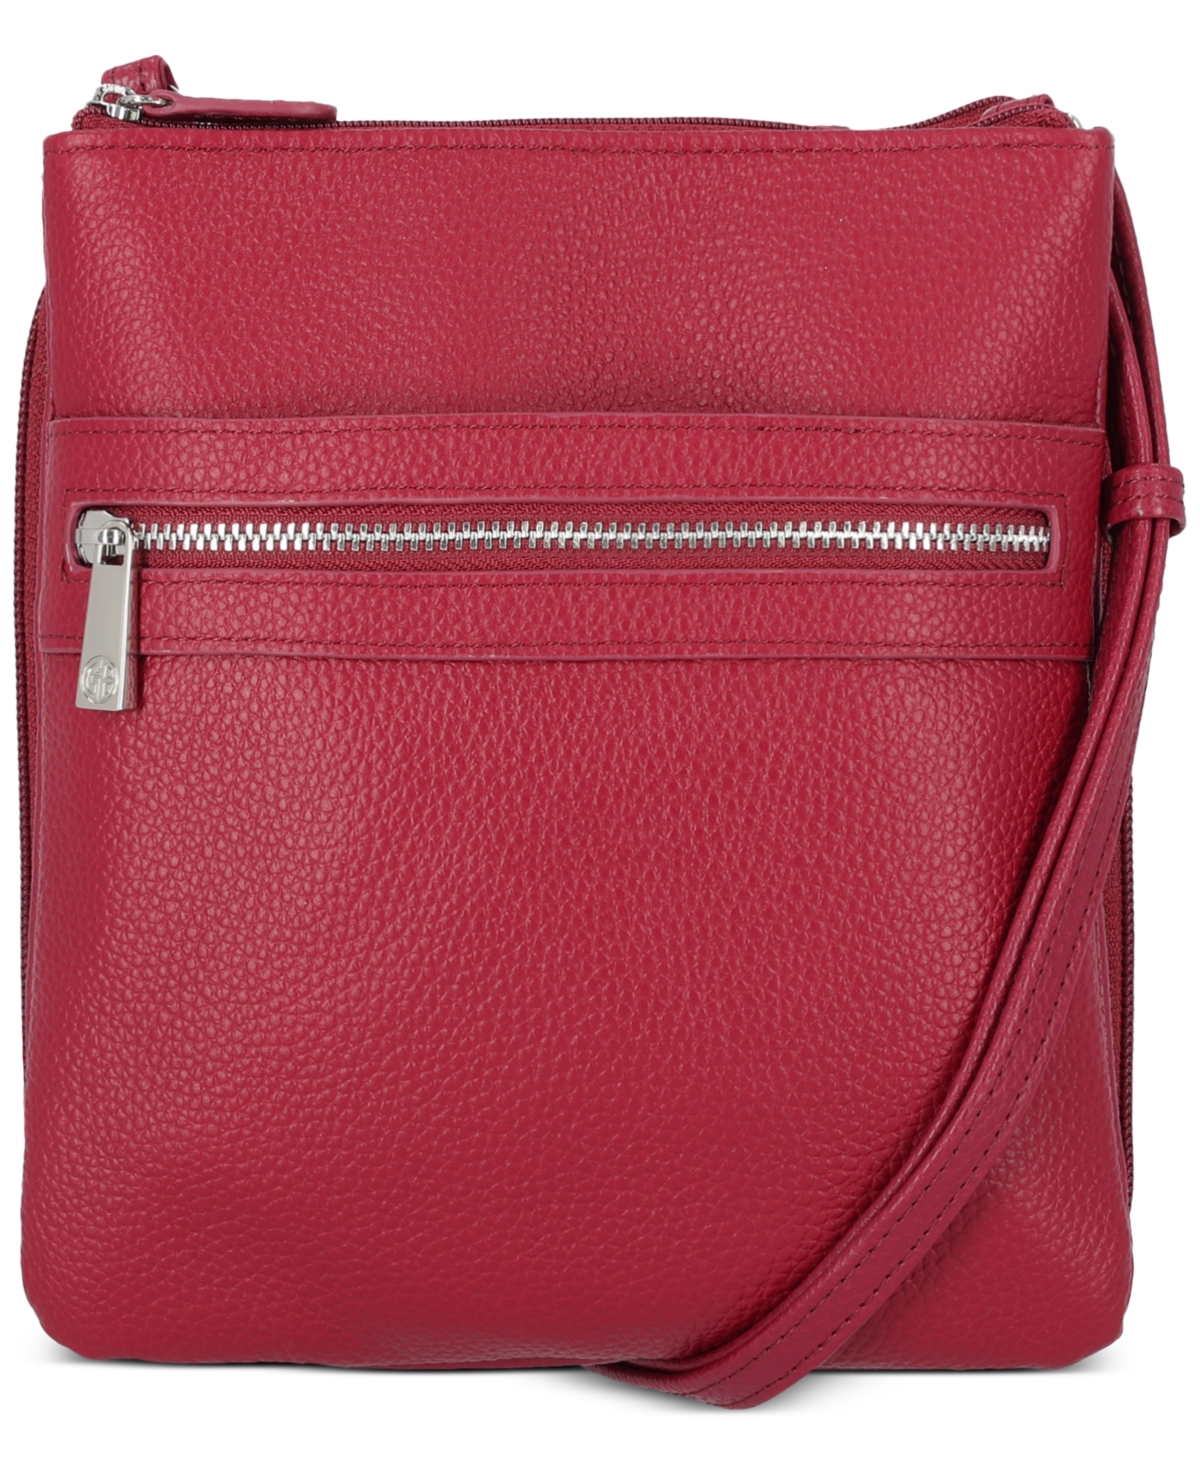 Giani Bernini Pebble Leather Receipt Wallet, Created for Macy's - Red